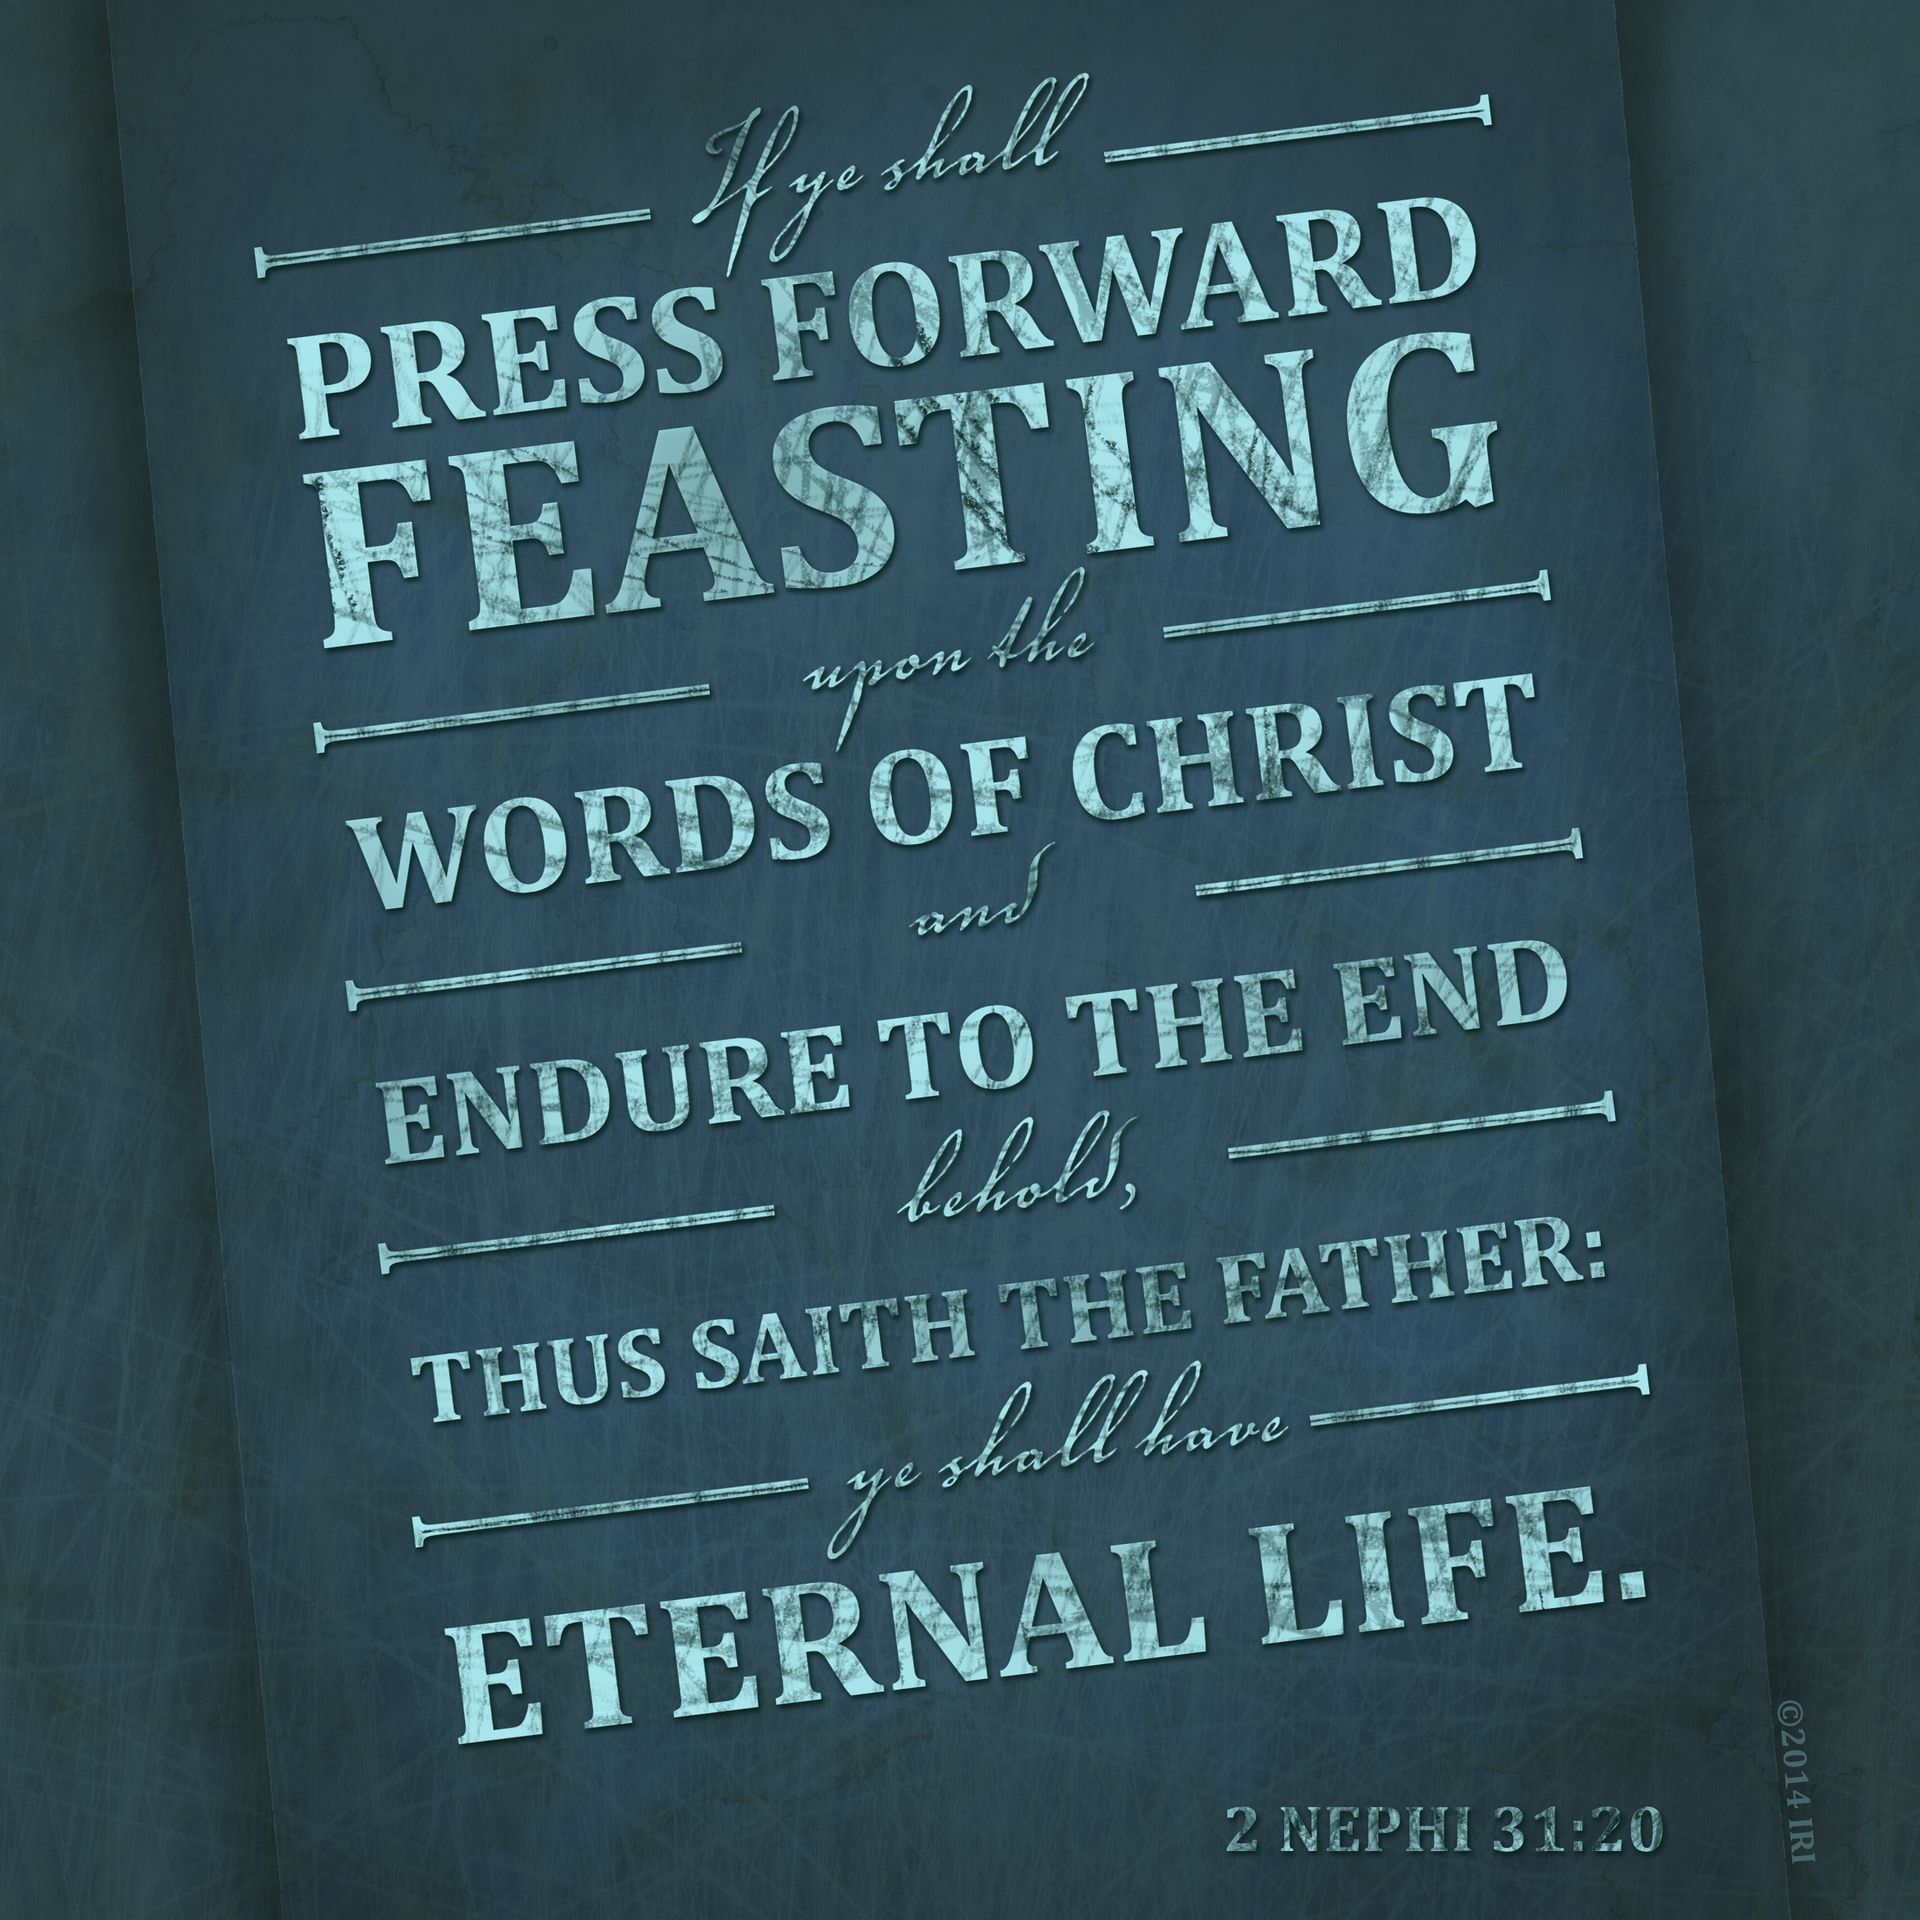 “If ye shall press forward, feasting upon the word of Christ, and endure to the end, behold, thus saith the Father: Ye shall have eternal life.”—2 Nephi 31:20